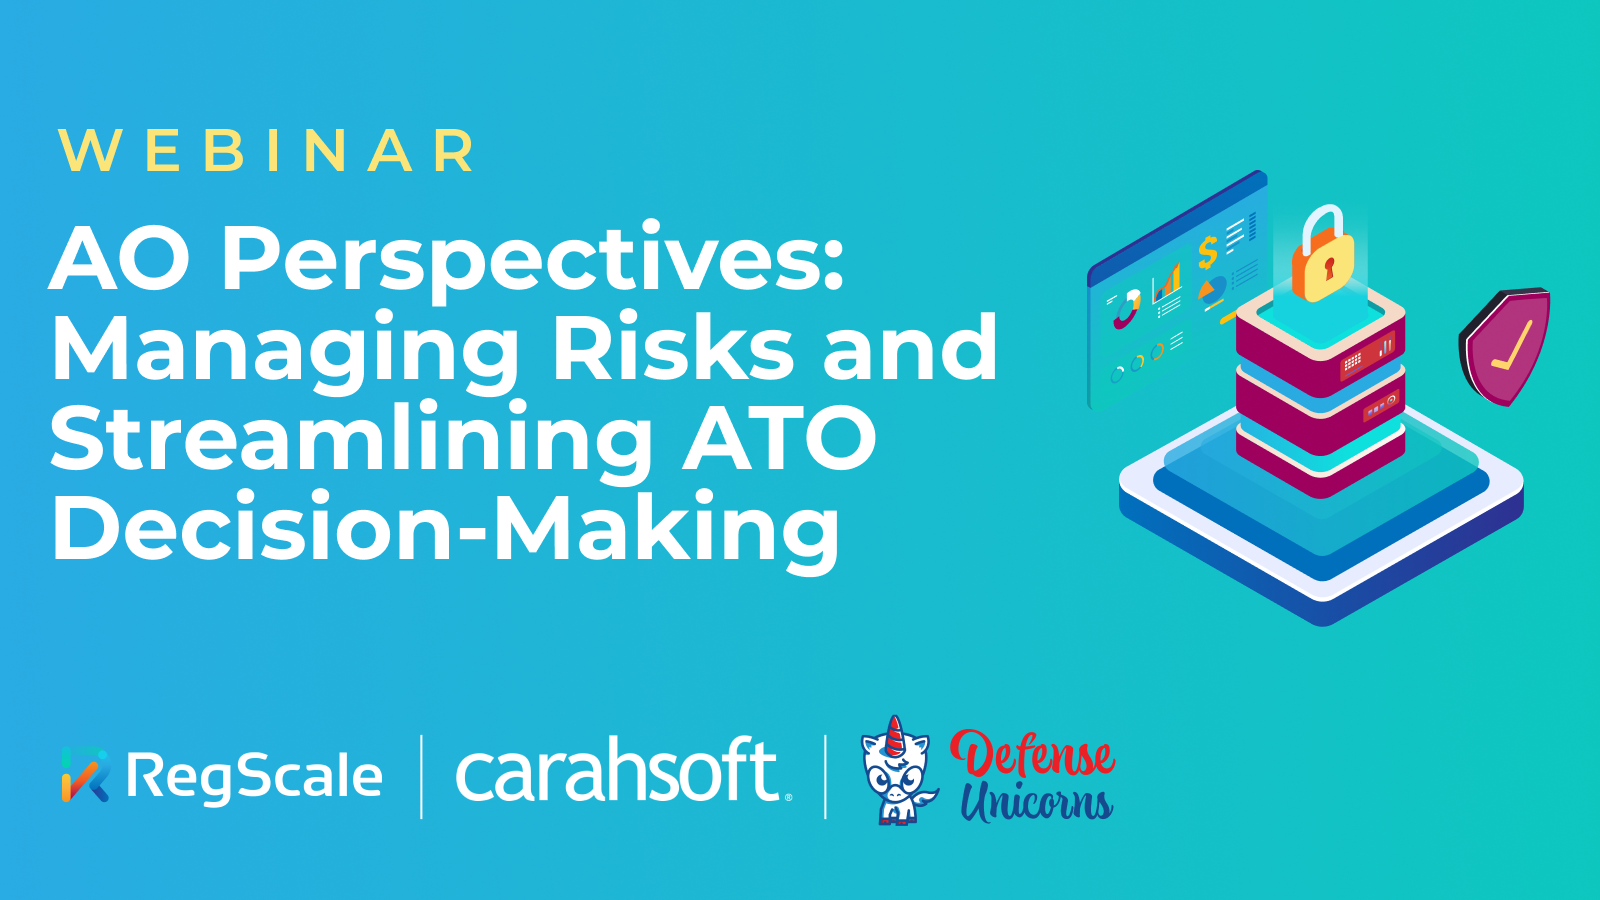 AO Perspectives: Managing Risks and Streamlining ATO Decision Making with RegScale, Carahsoft, and Defense Unicorns